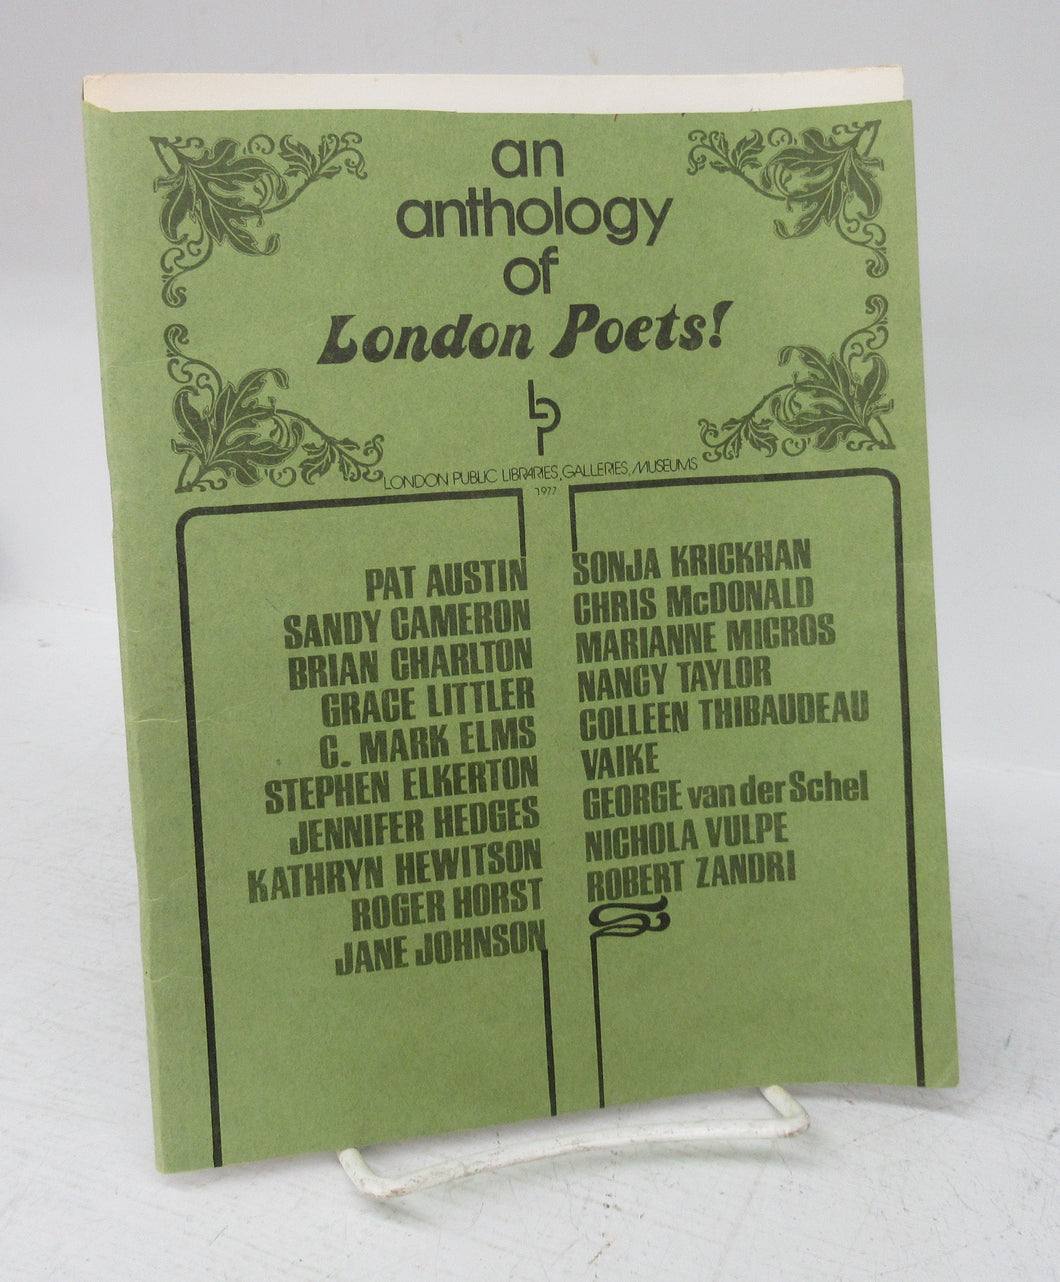 an anthology of London Poets!